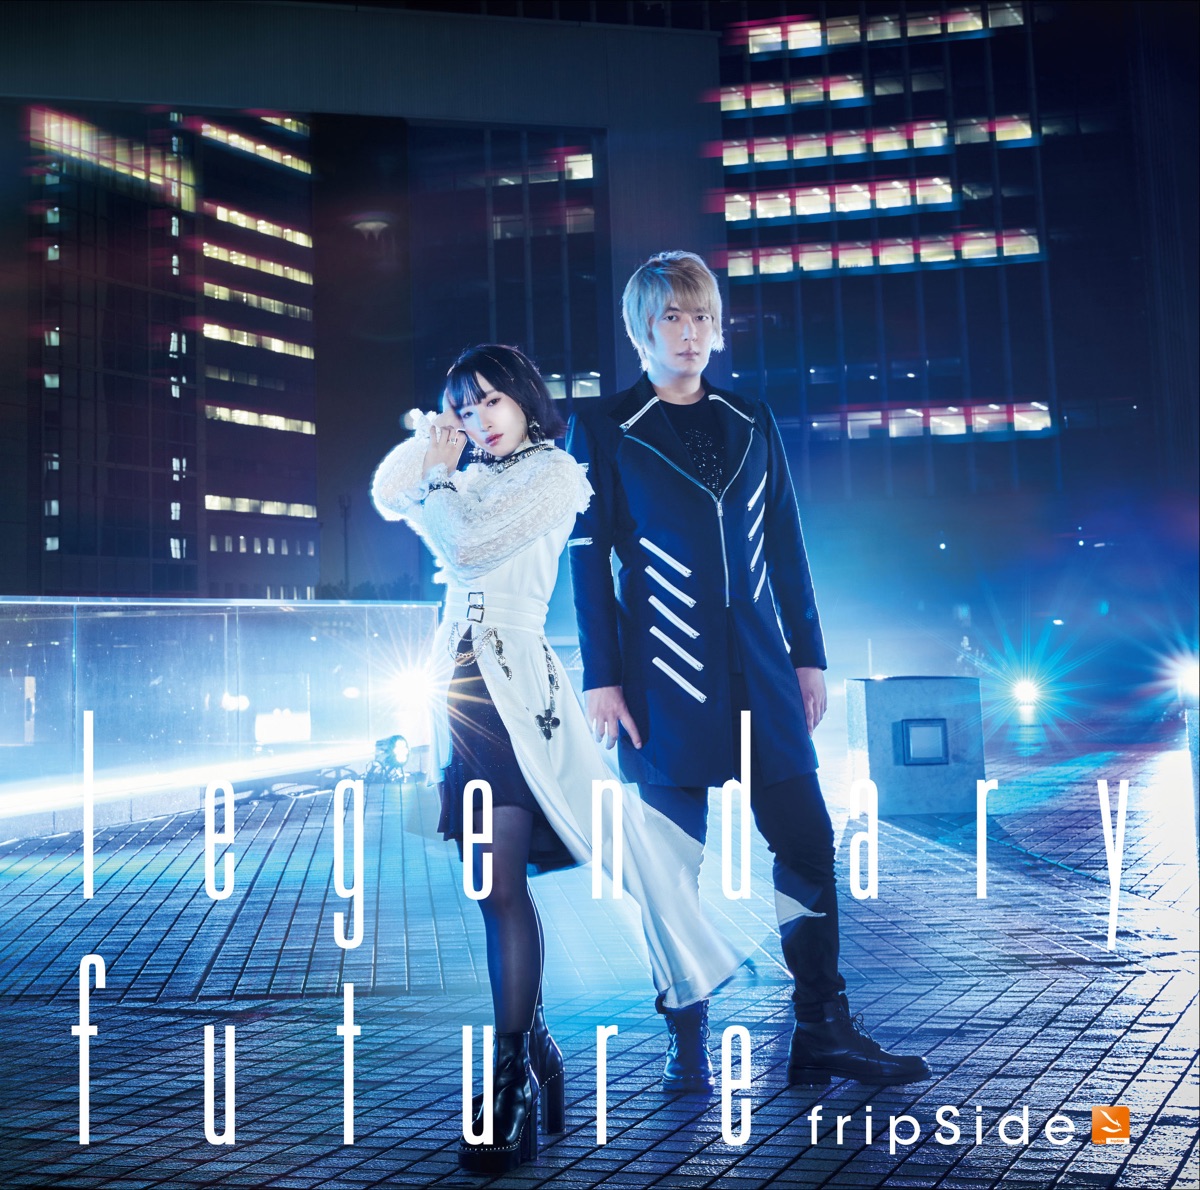 infinite synthesis 6 - fripSideのアルバム - Apple Music